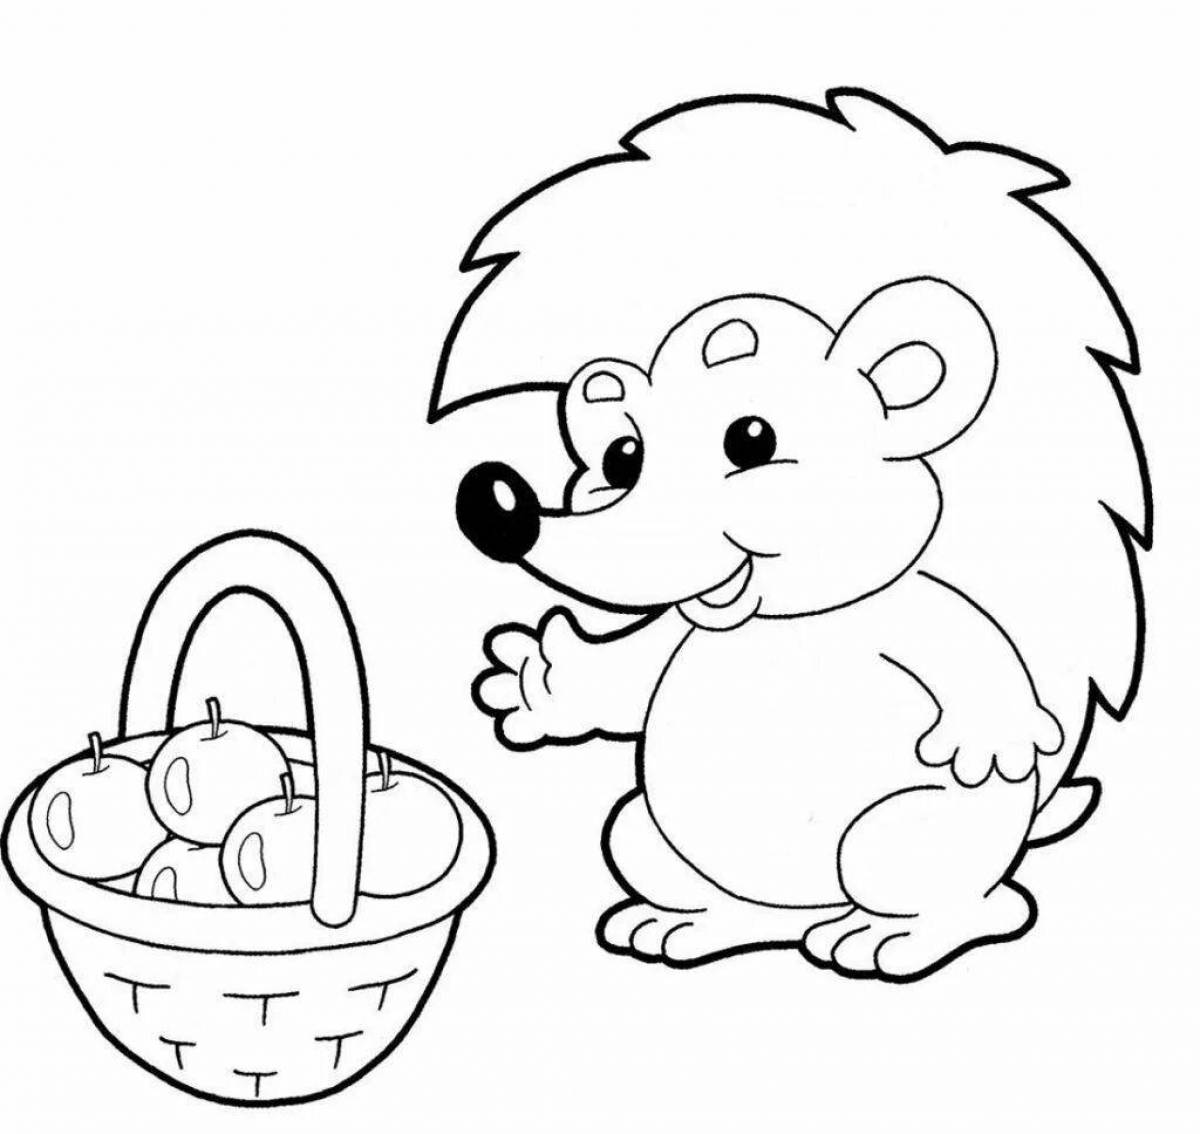 Color-frenzy coloring page for children aged 3-4 in kindergarten